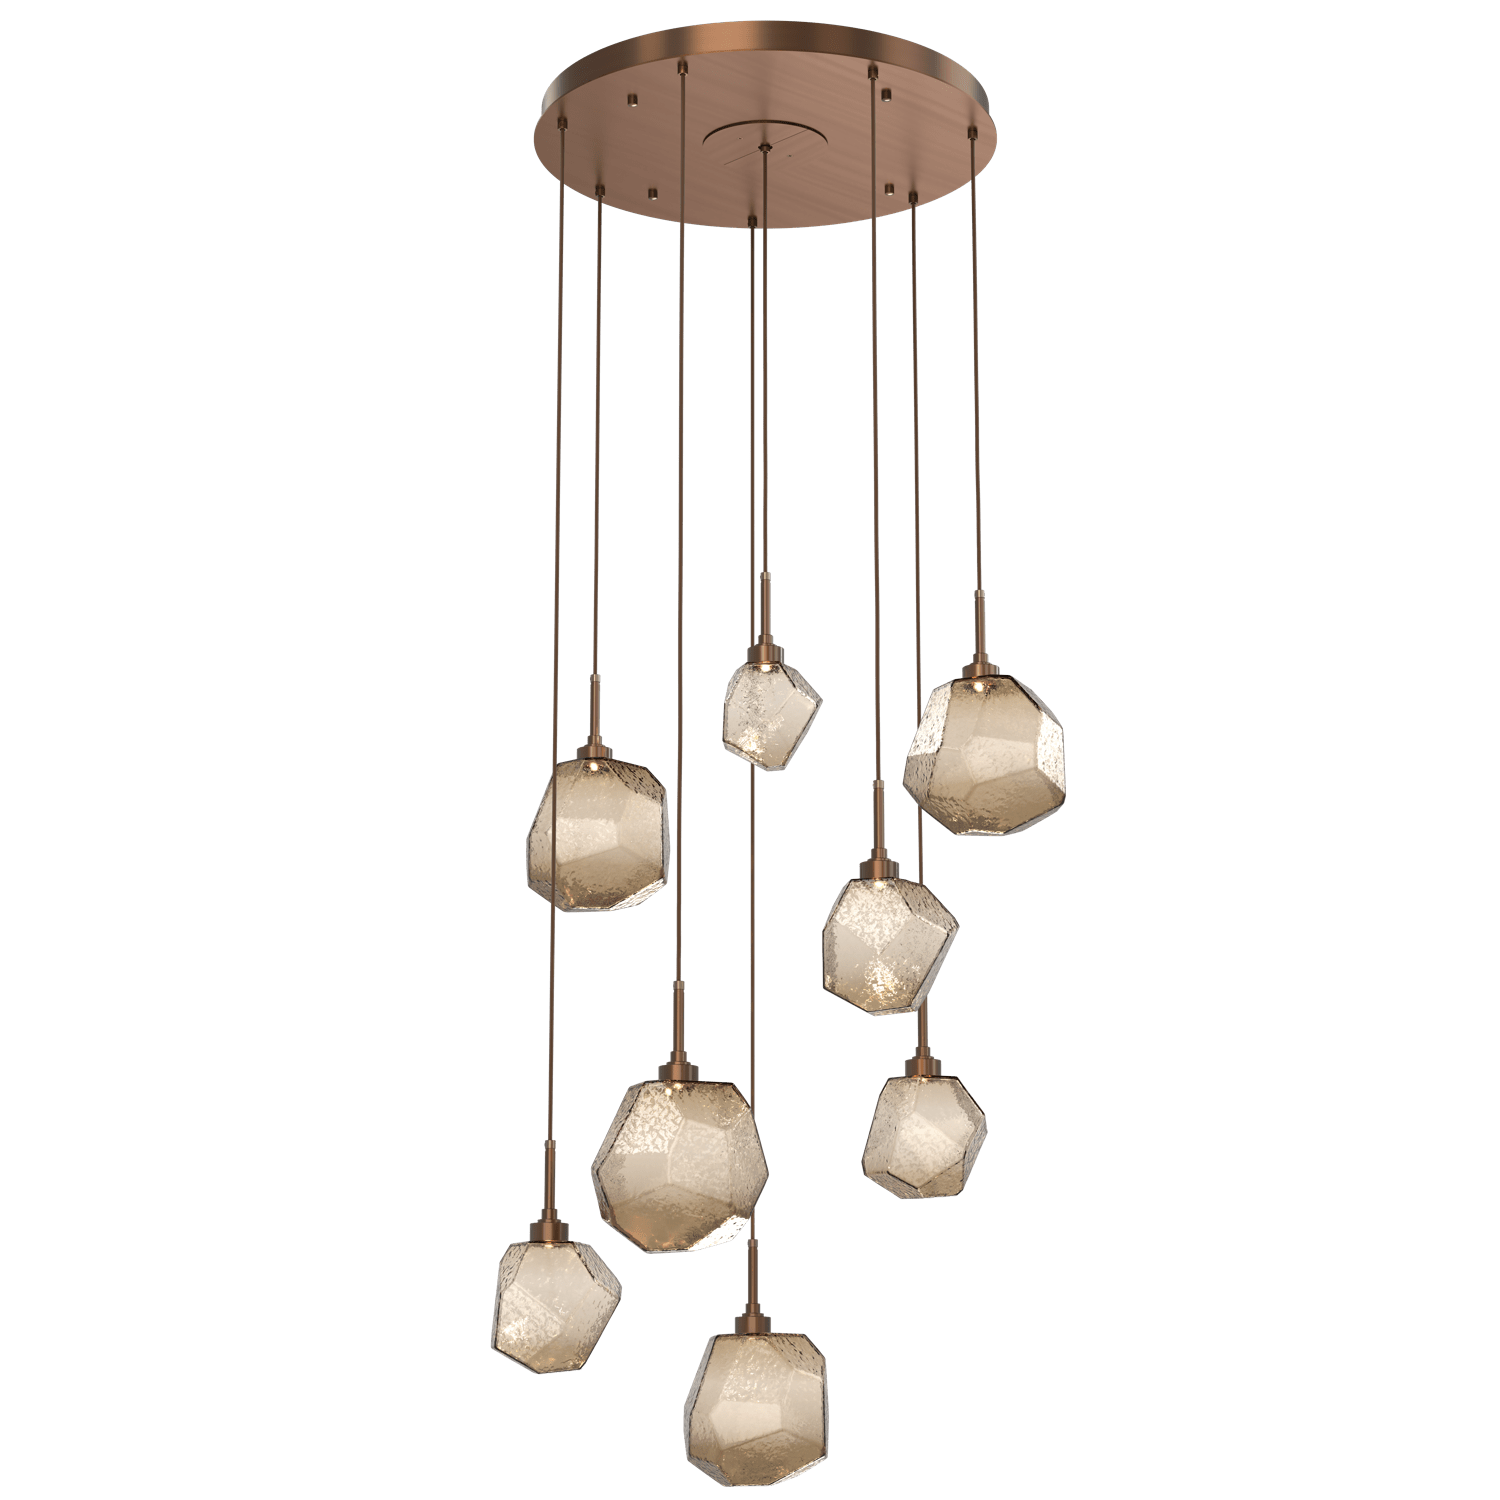 CHB0039-08-RB-B-Hammerton-Studio-Gem-8-light-round-pendant-chandelier-with-oil-rubbed-bronze-finish-and-bronze-blown-glass-shades-and-LED-lamping